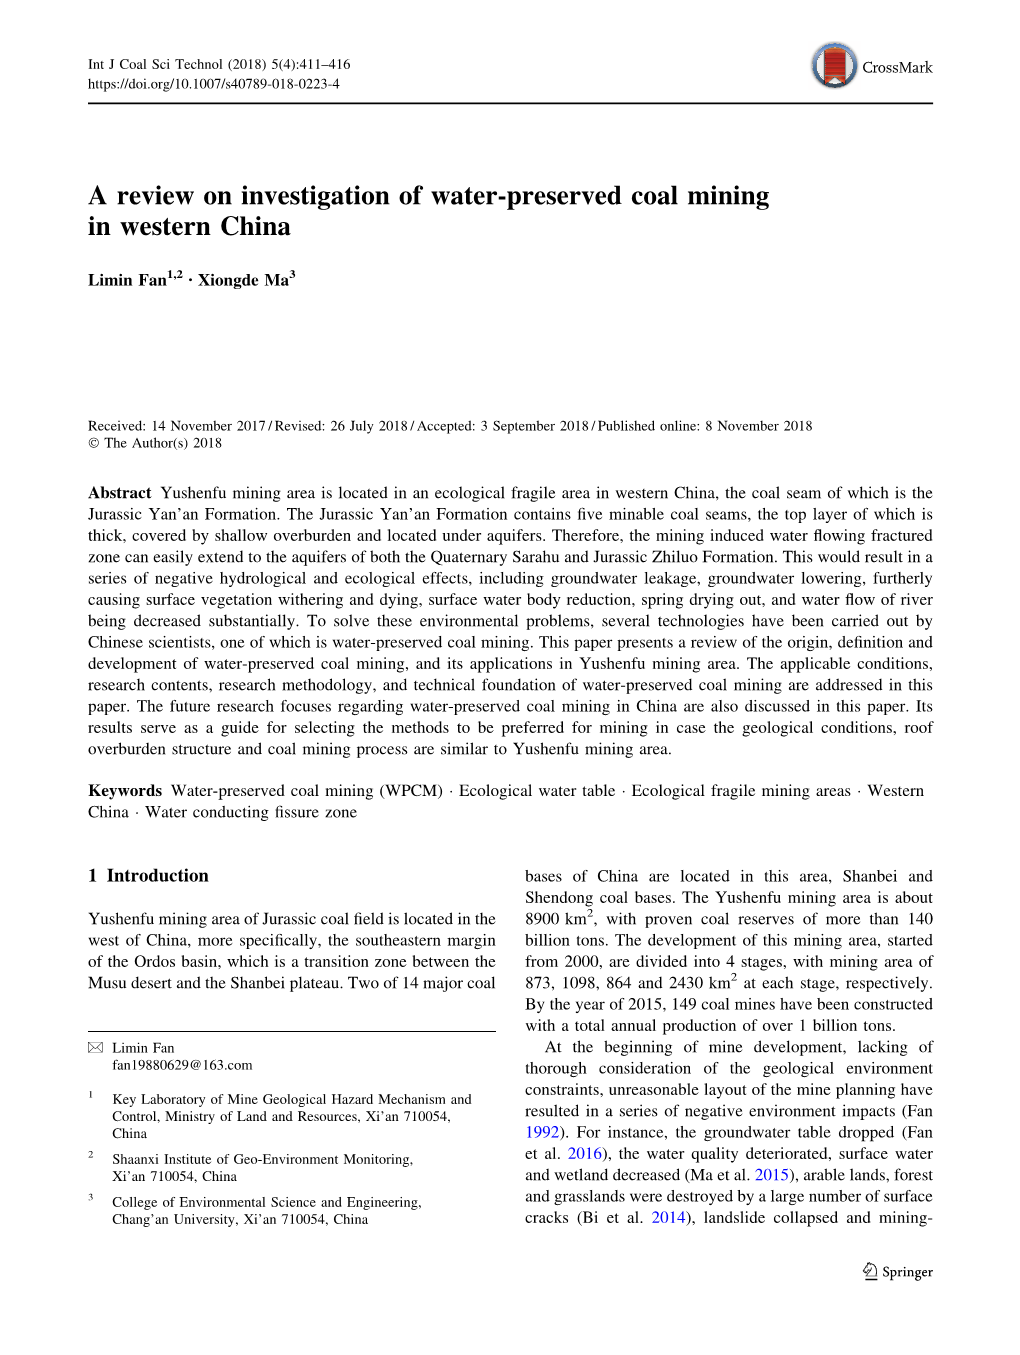 A Review on Investigation of Water-Preserved Coal Mining in Western China